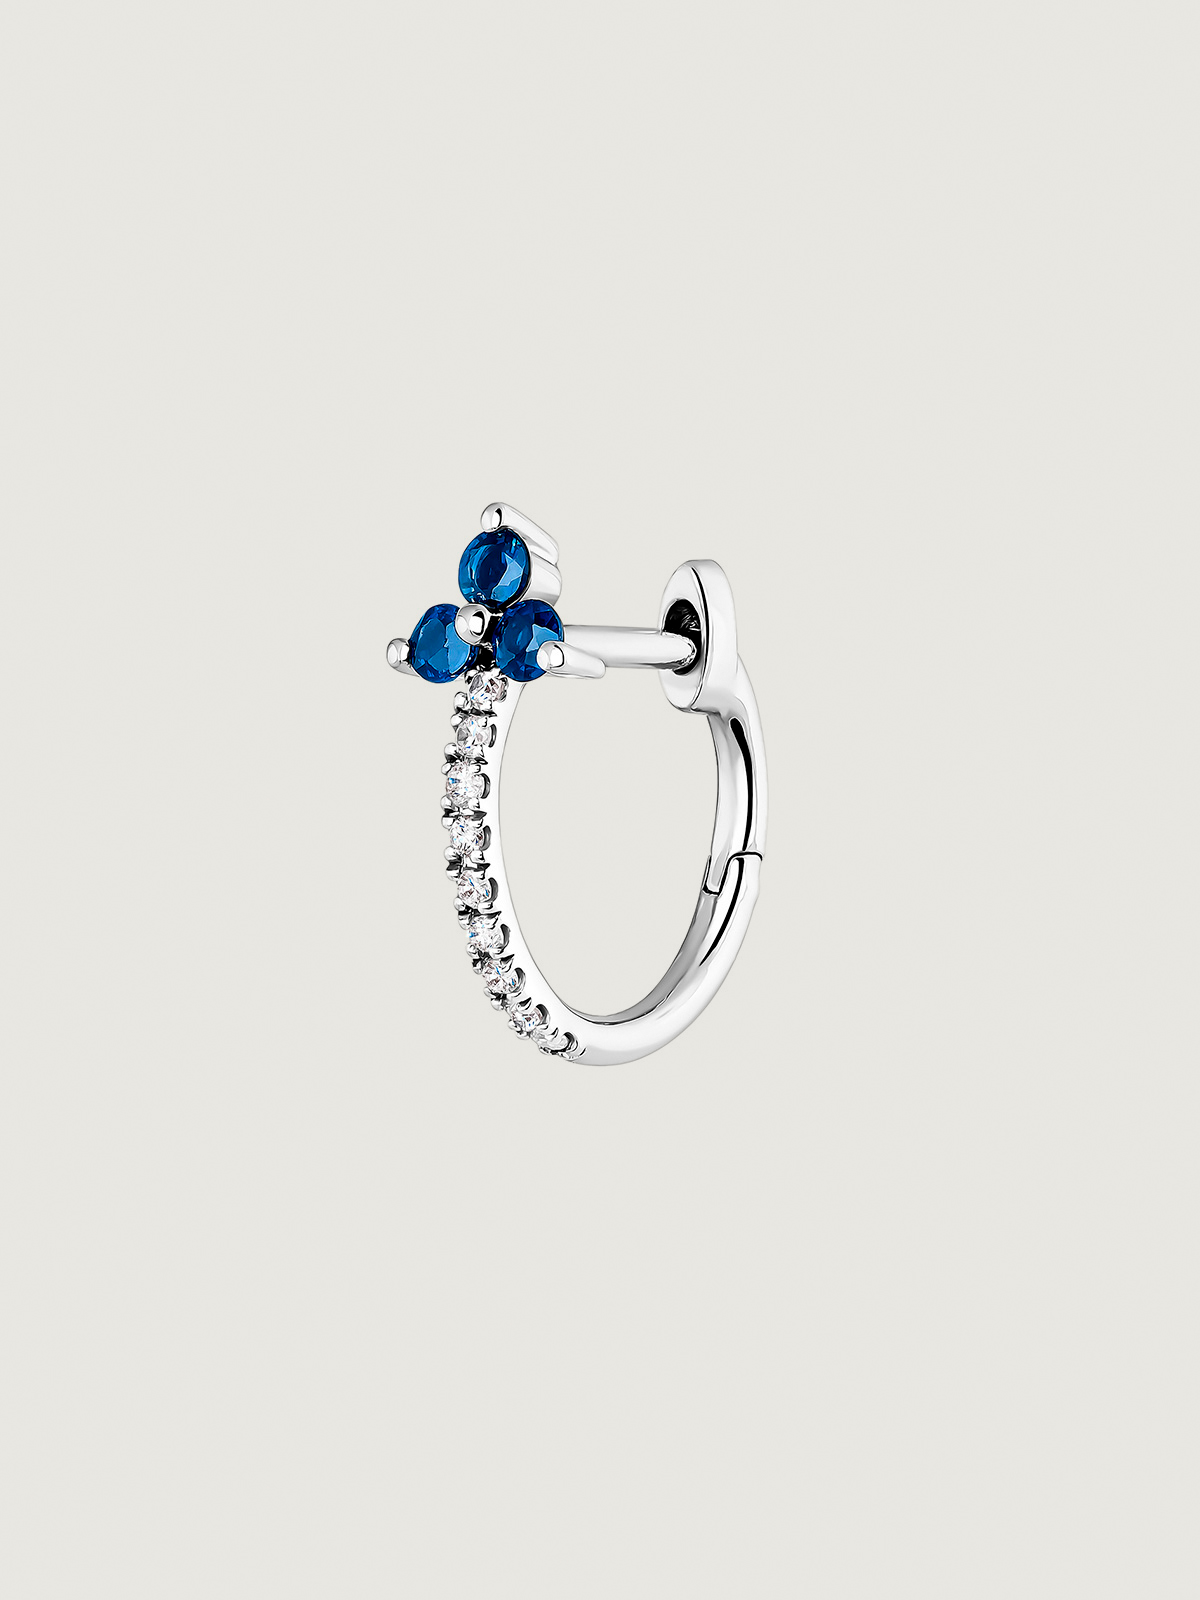 Individual small hoop earring made of 9K white gold with a blue sapphire and diamond clover.